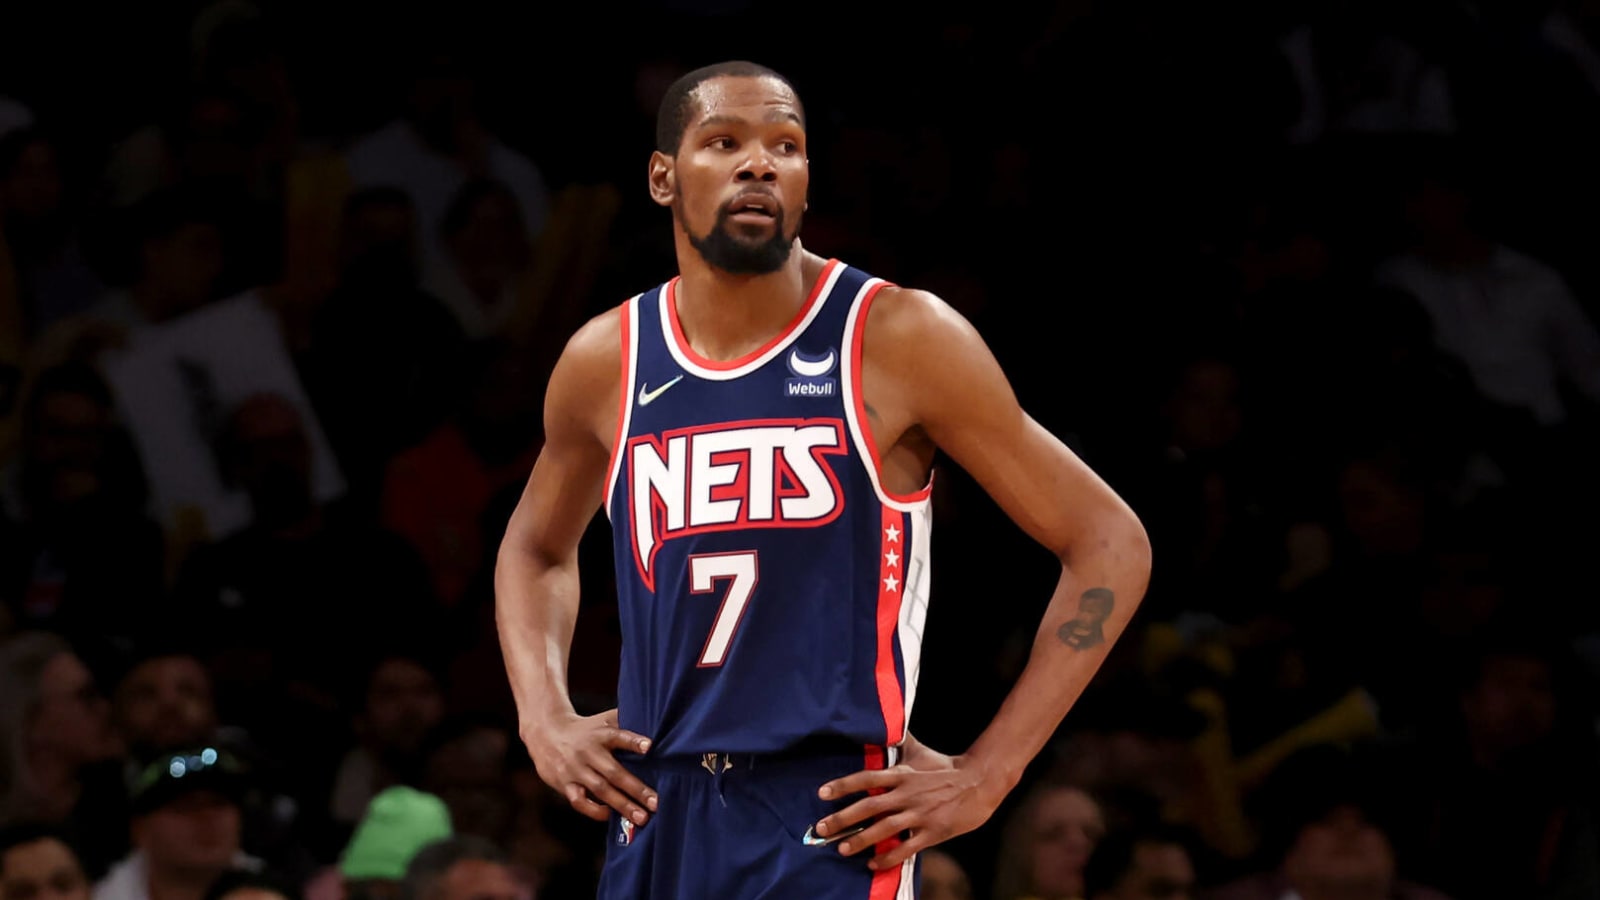 Report: New contending team enters mix for Kevin Durant